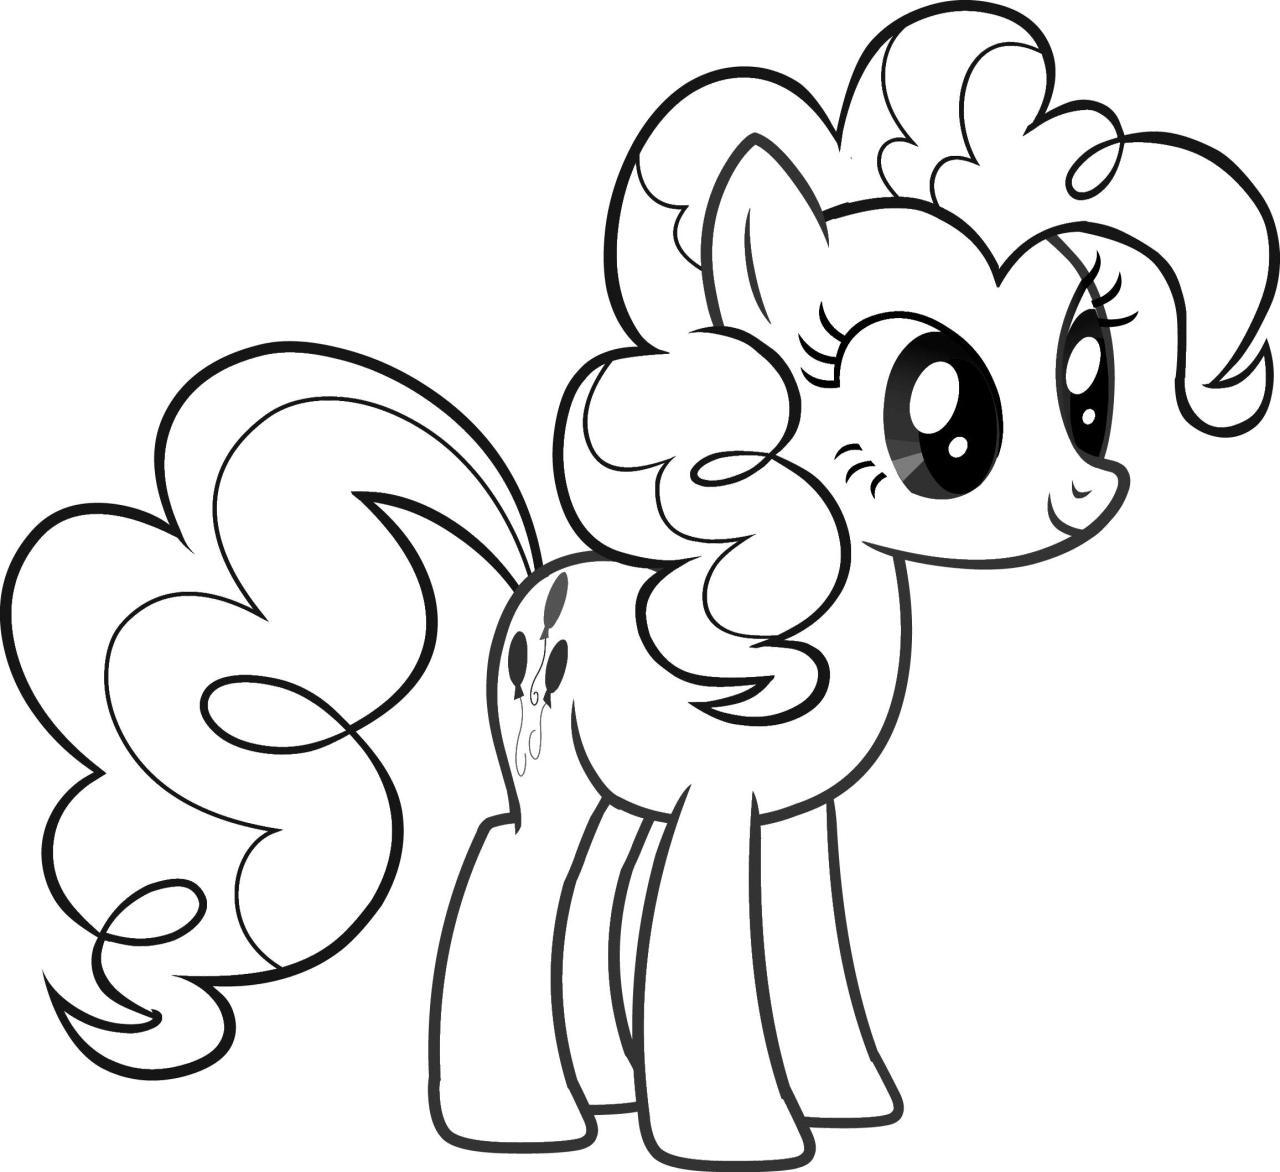 Rainbow Dash Pinkie Pie Fluttershy My Little Pony Coloring Pages